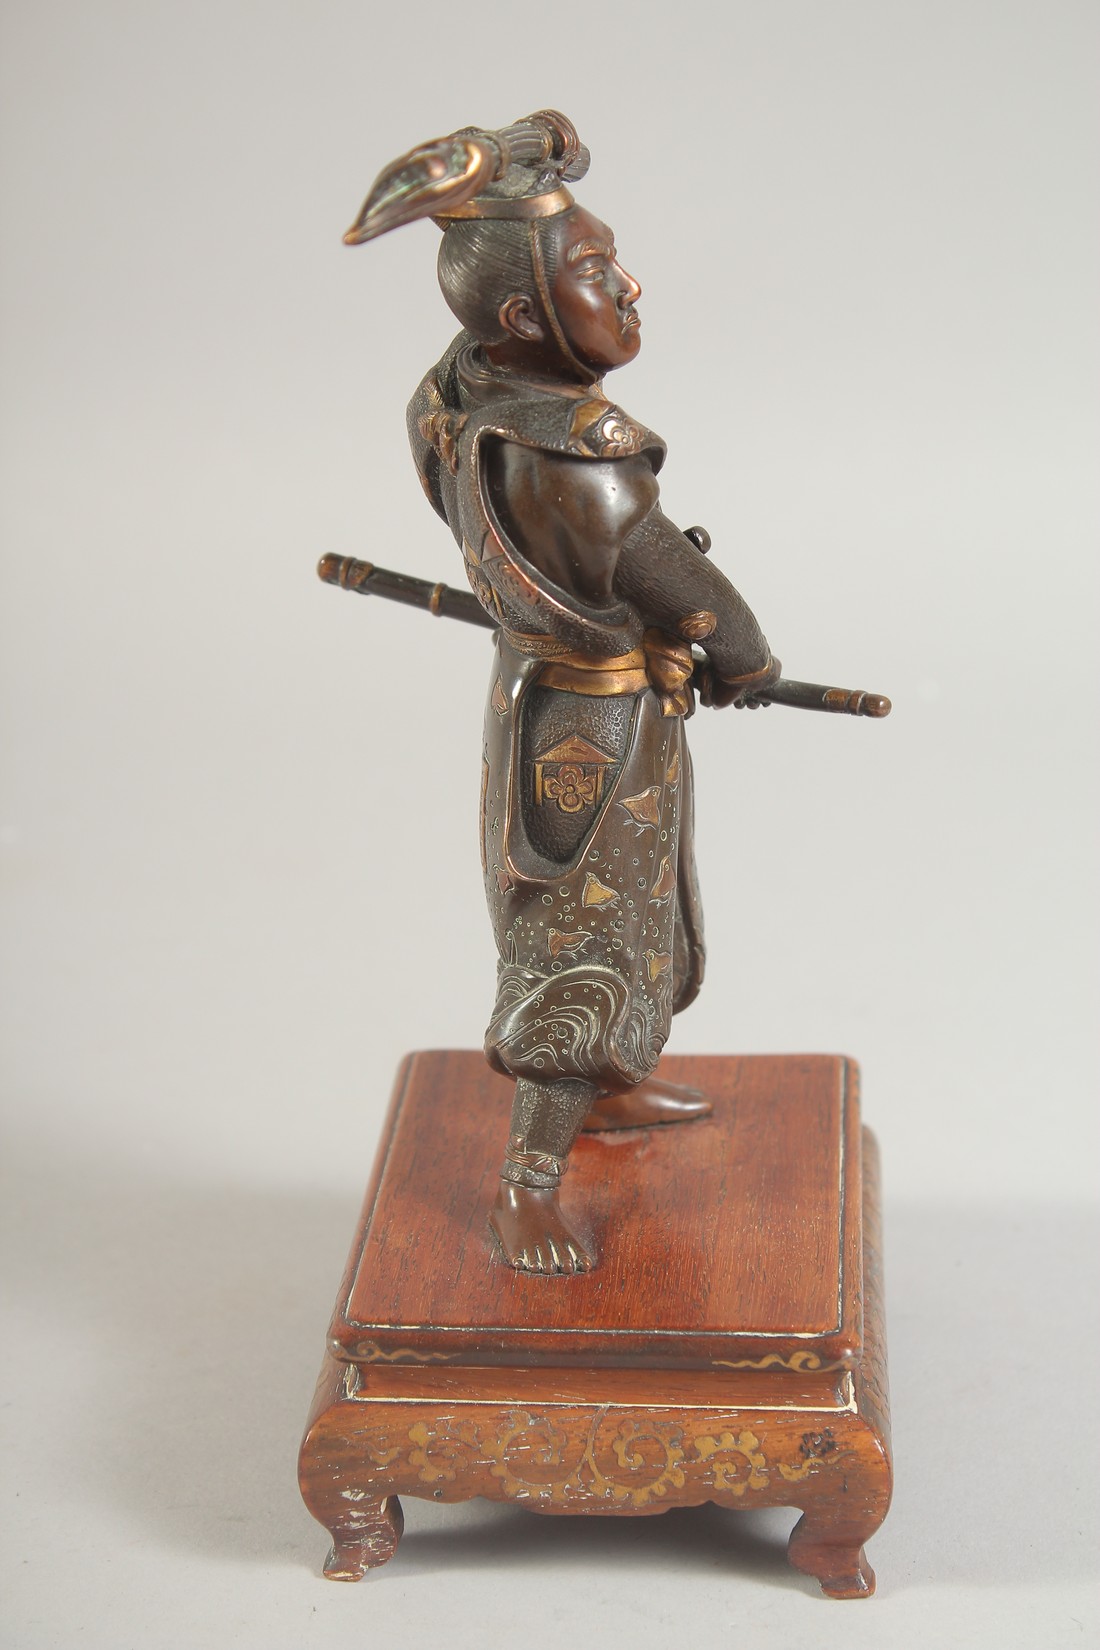 A FINE JAPANESE BRONZE OKIMONO of a warrior, signed Miyao Zo, mounted to a wooden base, 19.5cm - Image 2 of 6